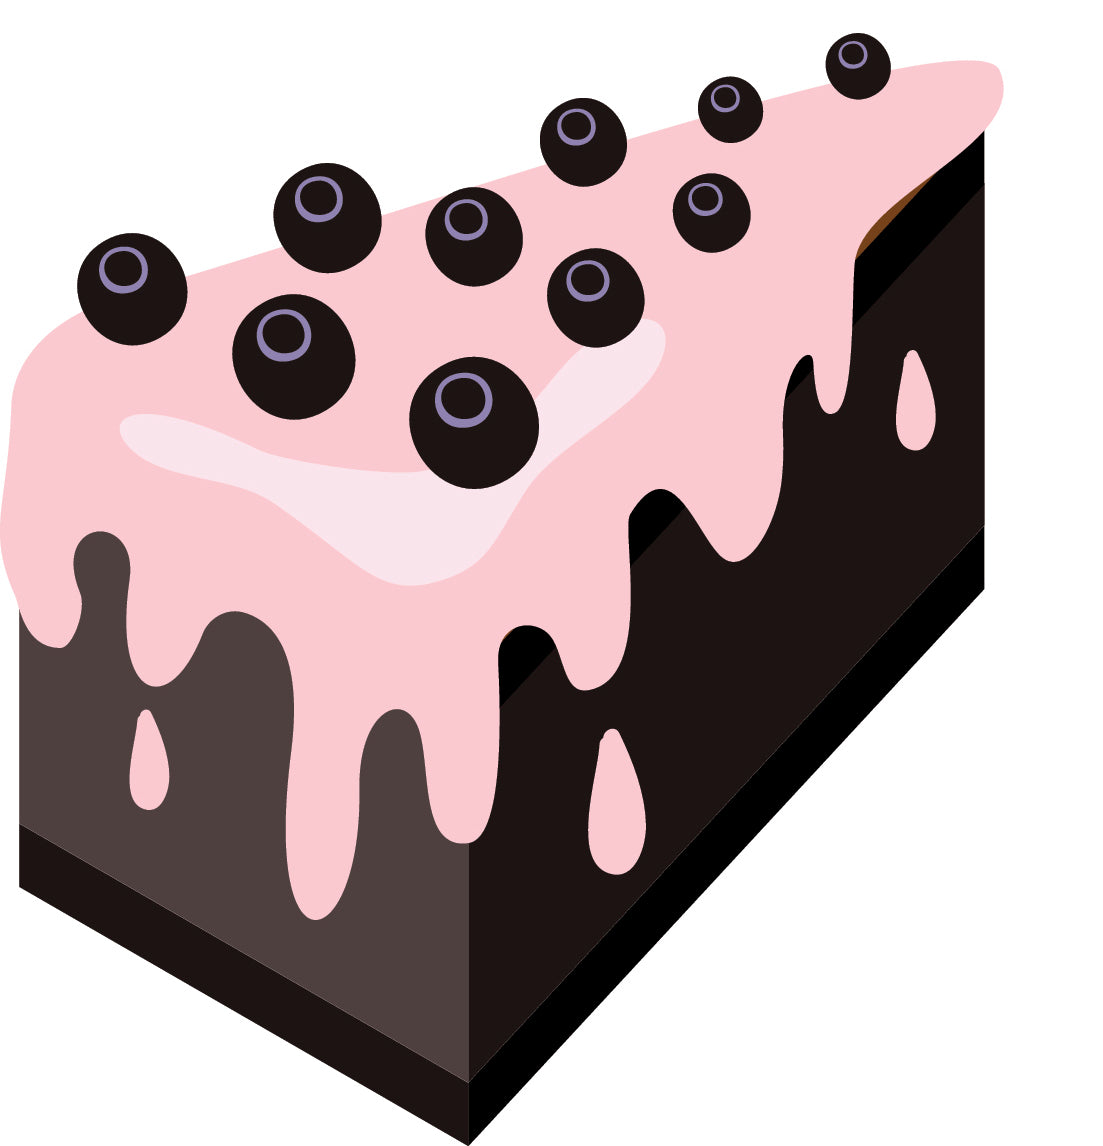 Yummy Chocolate Cake with Strawberry Frosting Vinyl Decal Sticker